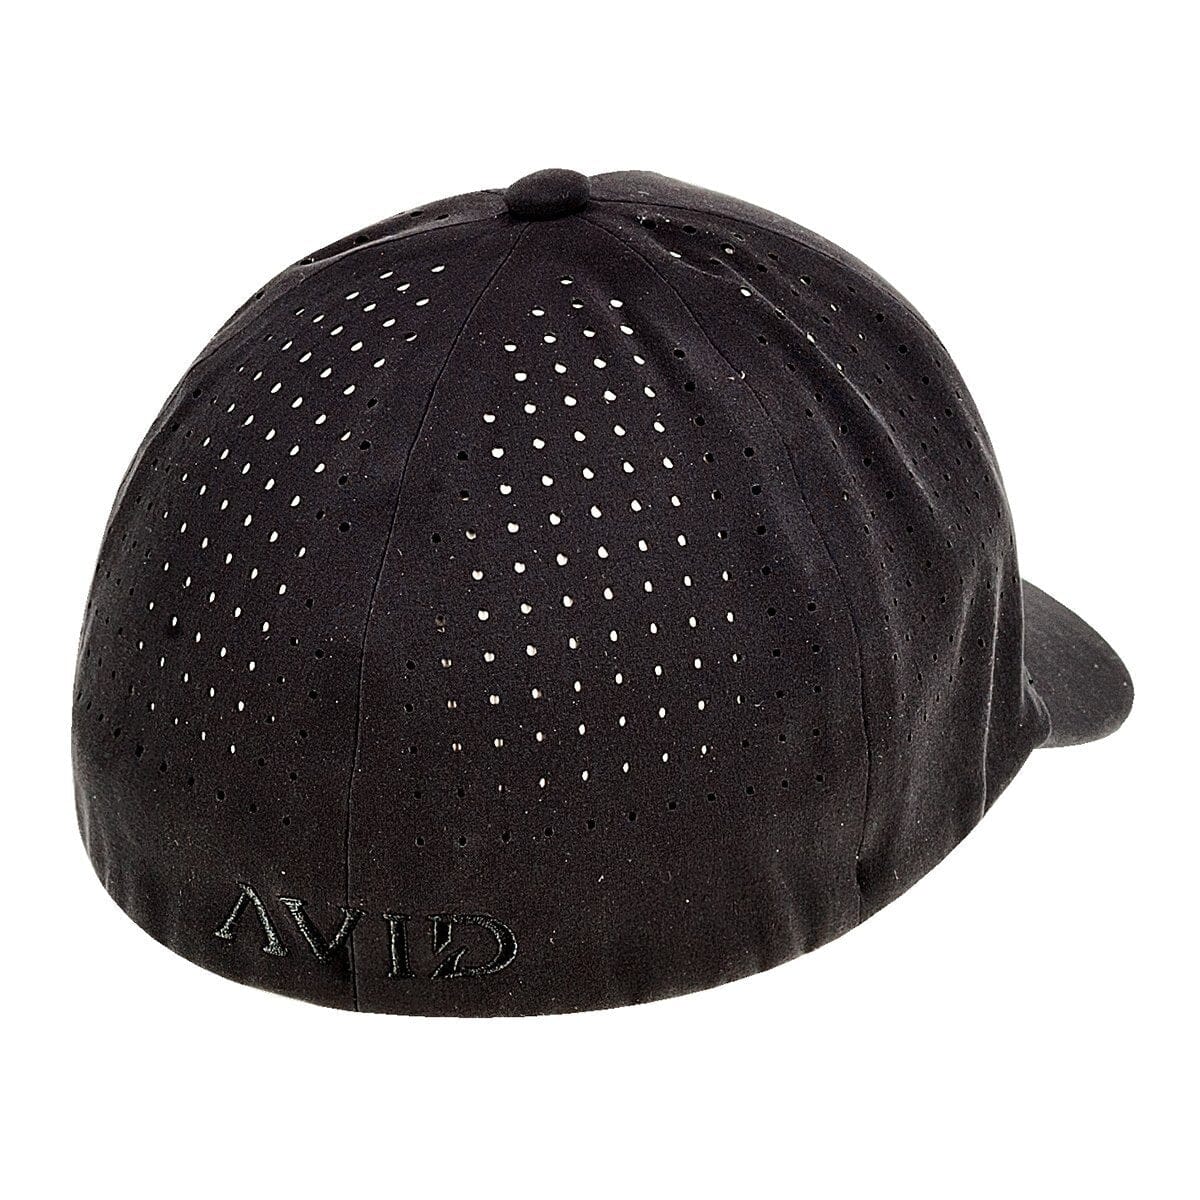 Avid Gear Fishing Flex Fit Alpha Performance Hat Laser Cut Vented Back for  Serious Anglers Flex Fit 2 Sizes